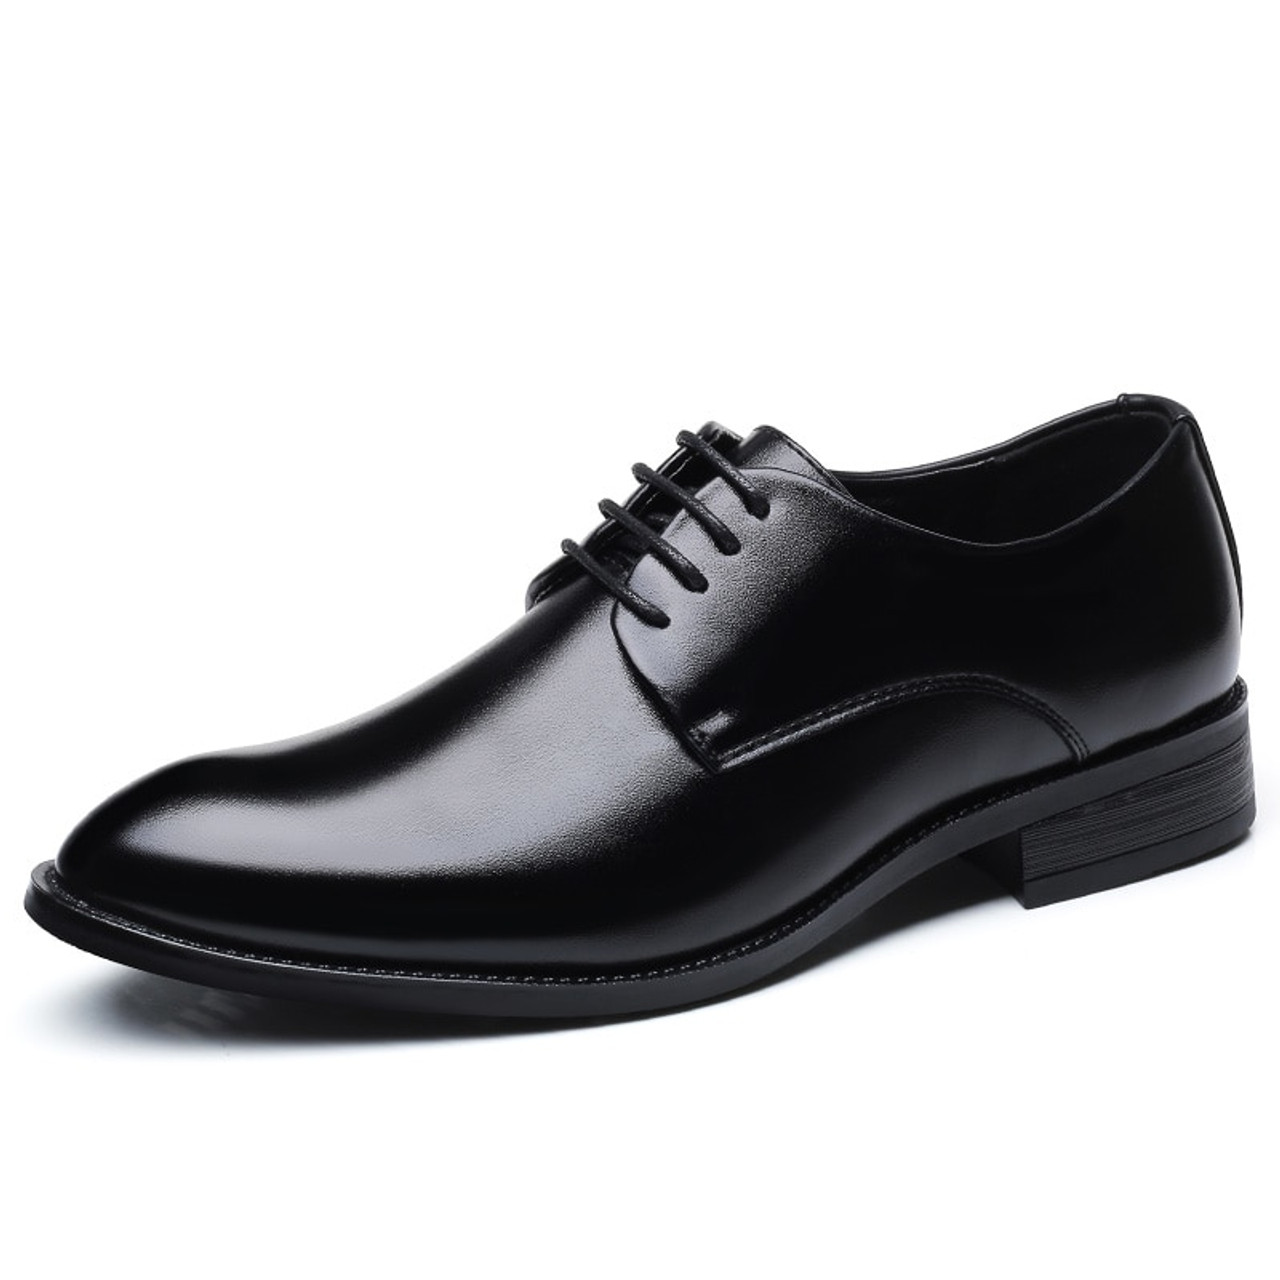 Men's Formal Shoes,British Work OfficeBusiness Leather Shoes Banquet  Wedding Prom Dress Shoes,Black A- 39/UK 6.5/US 7